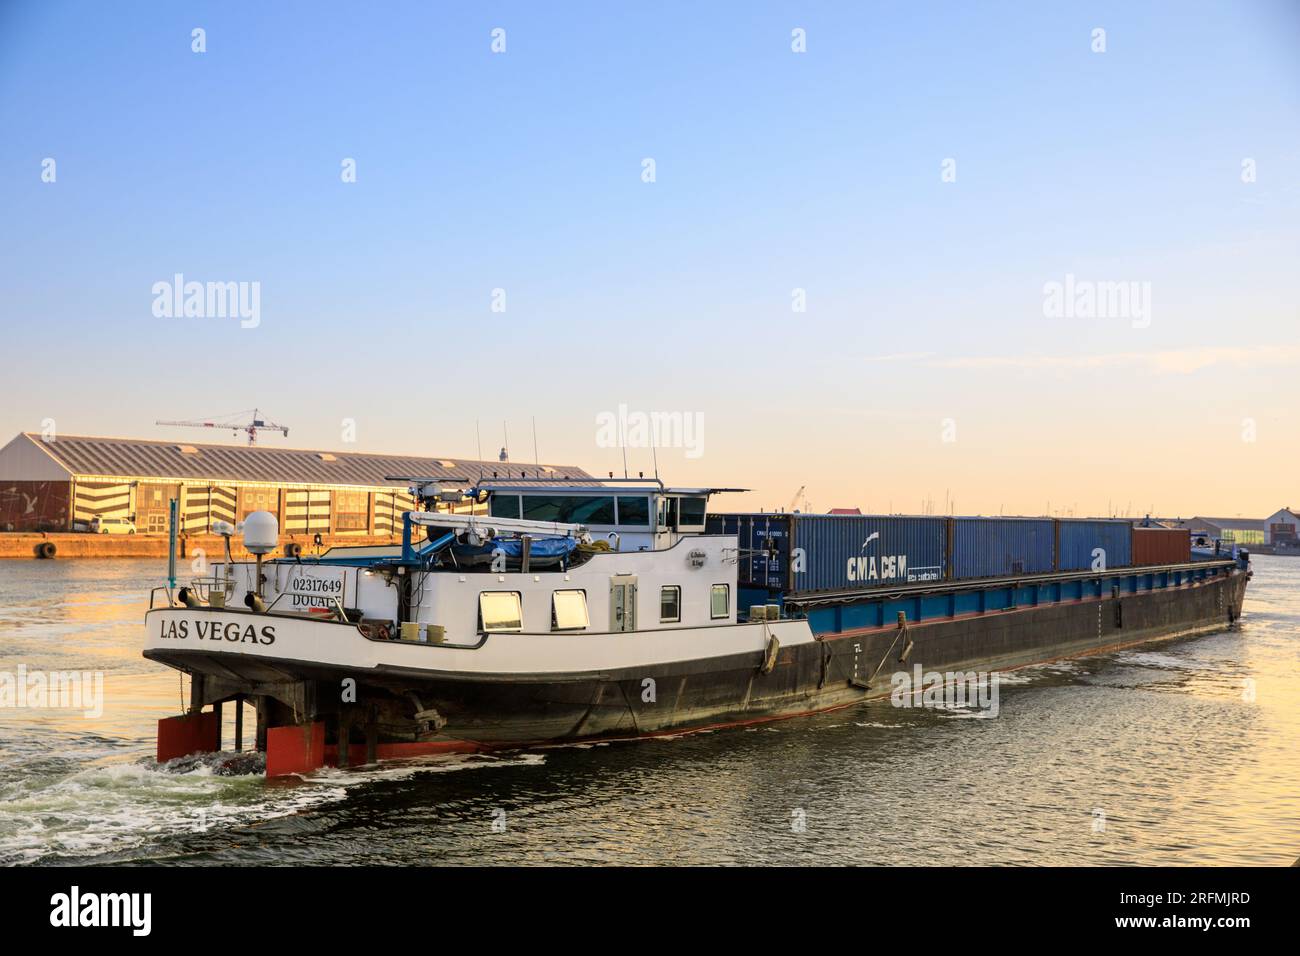 France, Hauts-de-France region, Nord department, Dunkirk, port area, barge manoeuvring Stock Photo